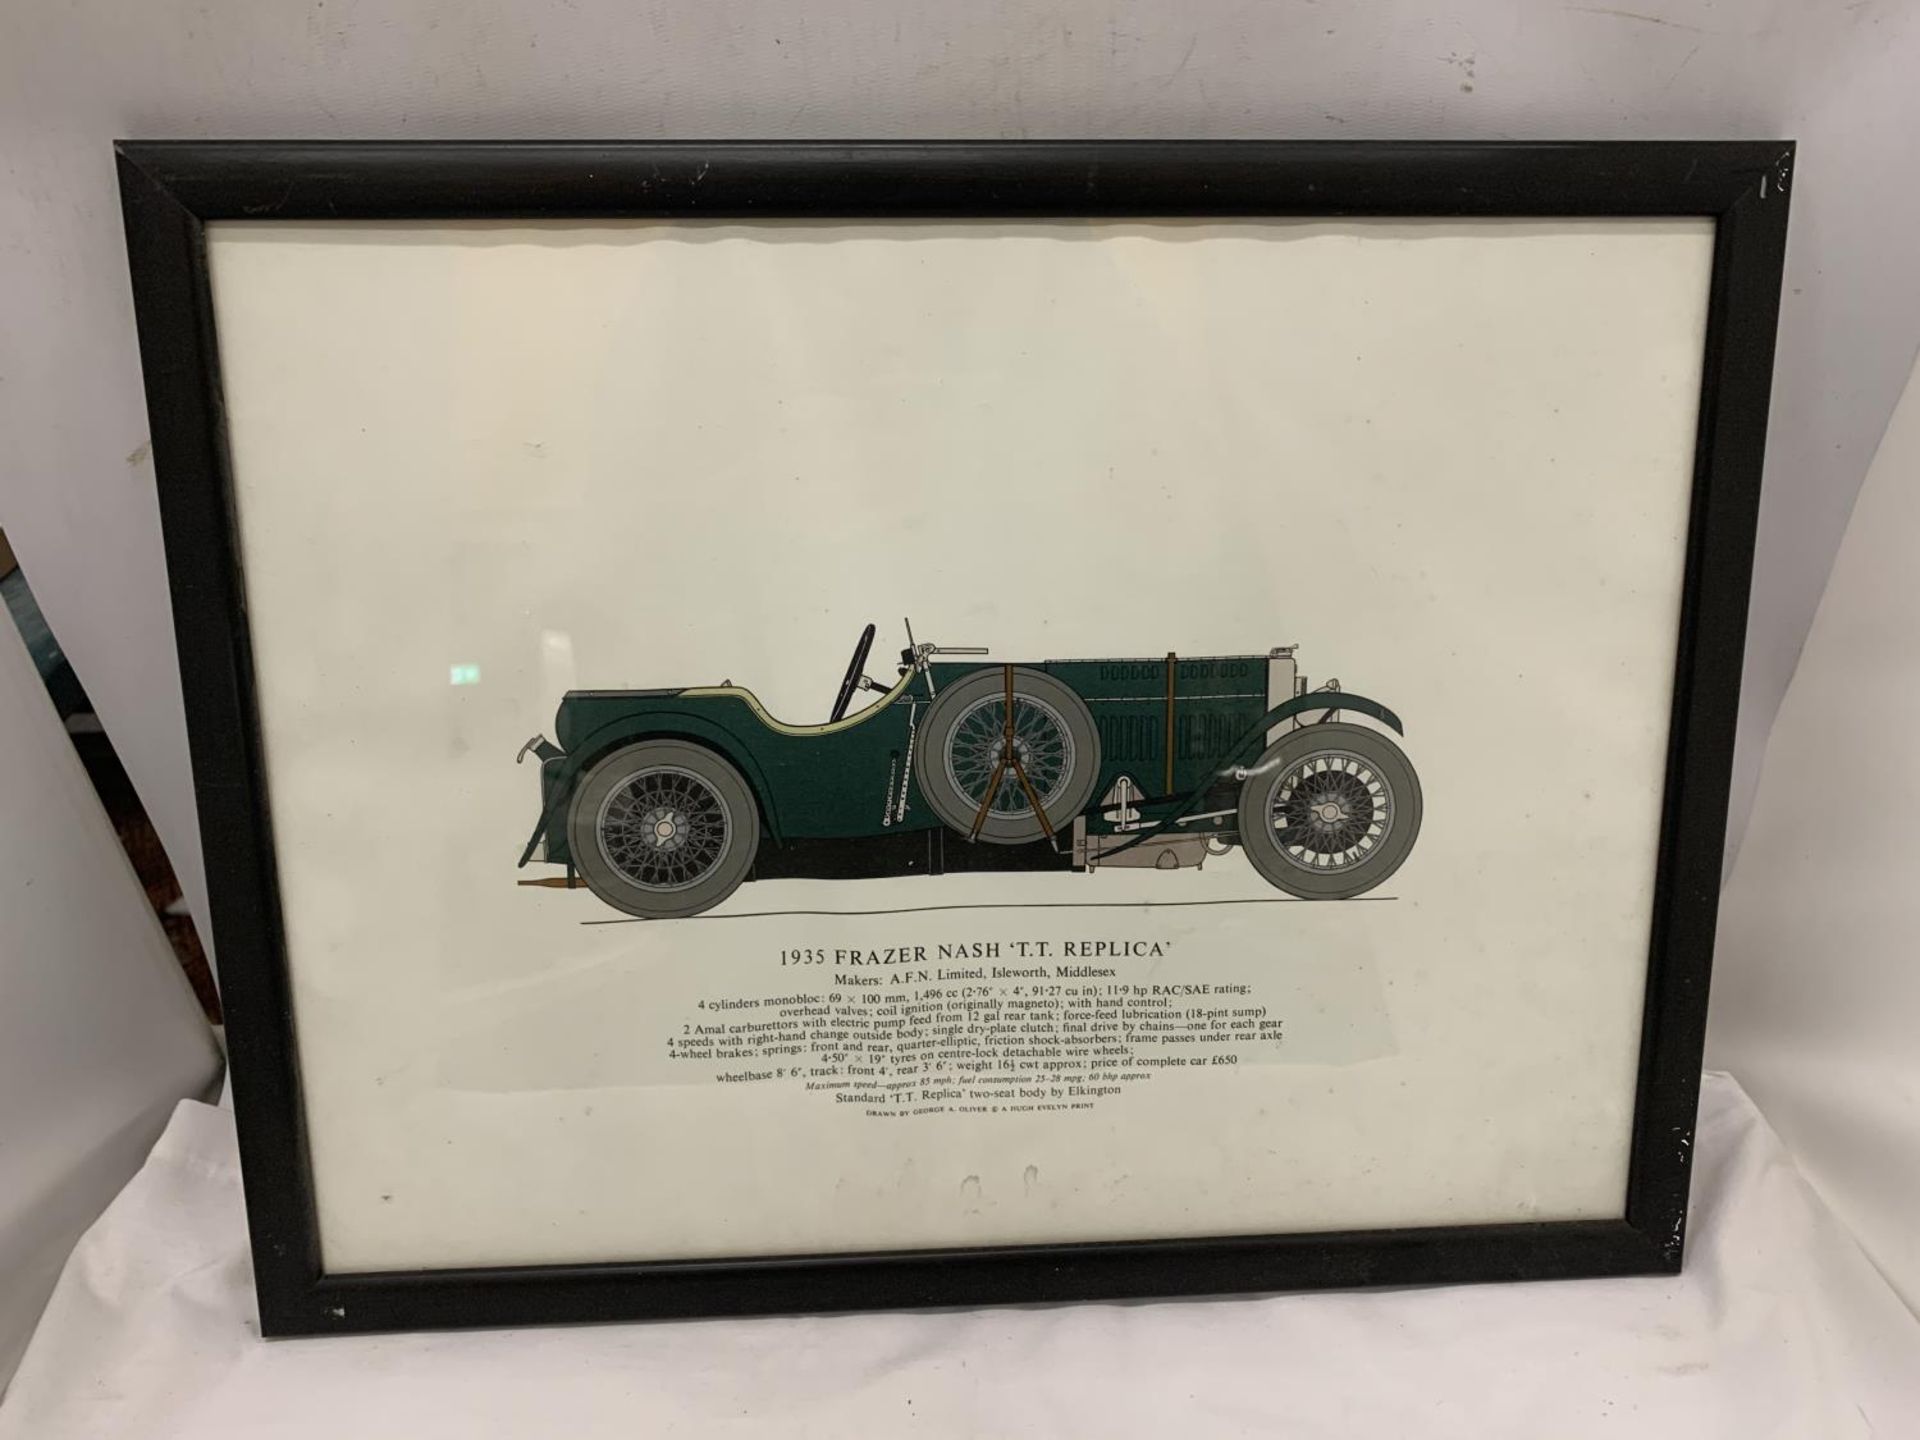 SIX FRAMED PRINTS OF VINTAGE CARS TO INCLUDE A 1930 AUSTIN 7 'ULSTER', 1926 SUNBEAM 3 LITRE, ETC - Image 7 of 7